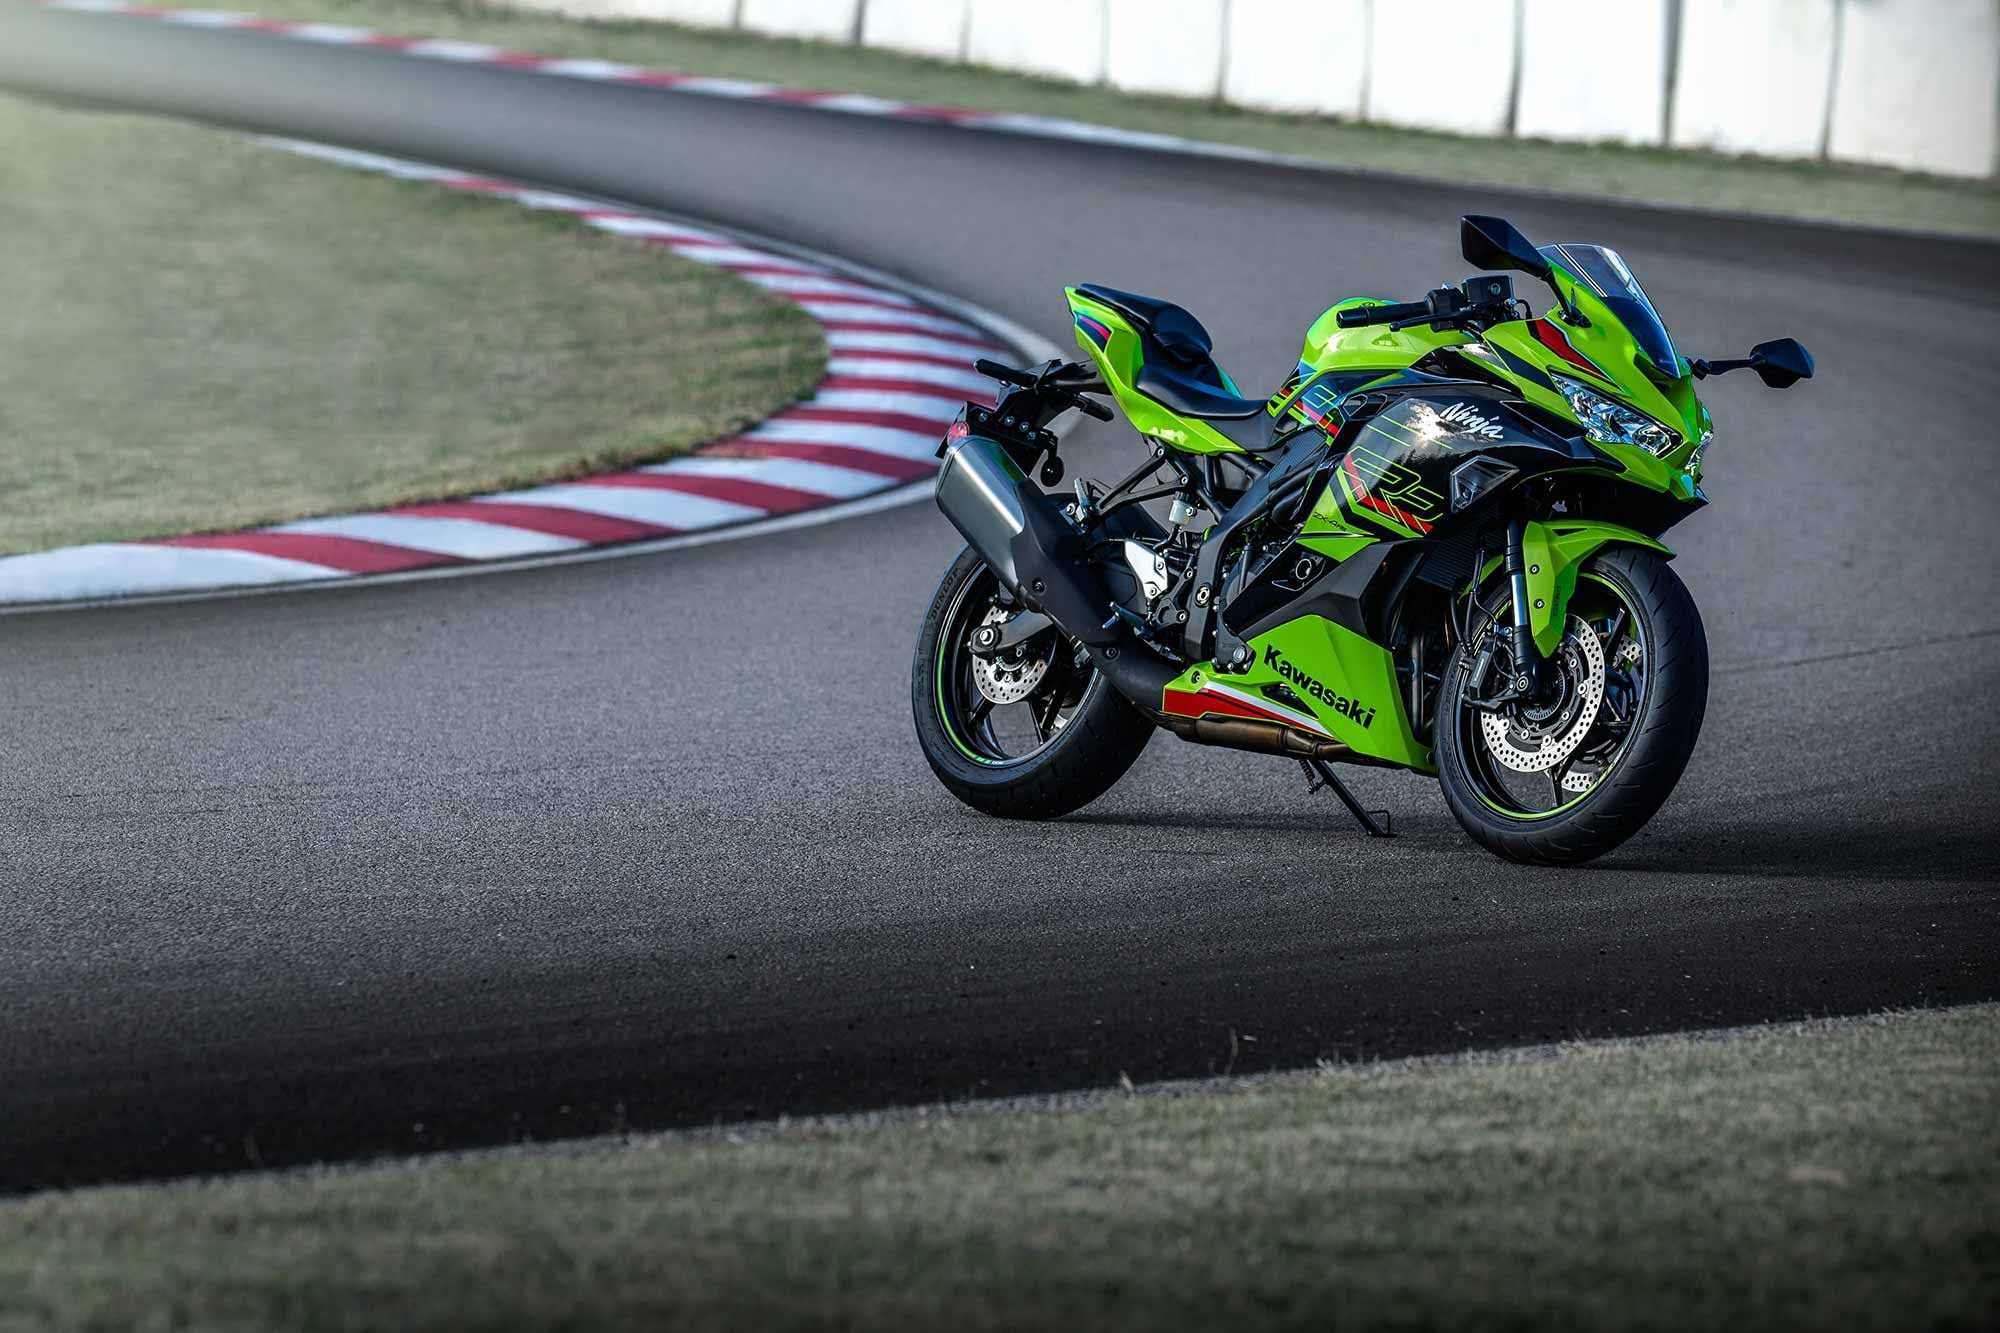 A smaller, 400cc displacement could alleviate some of the insurance pitfalls that supersport and superbike owners experience.